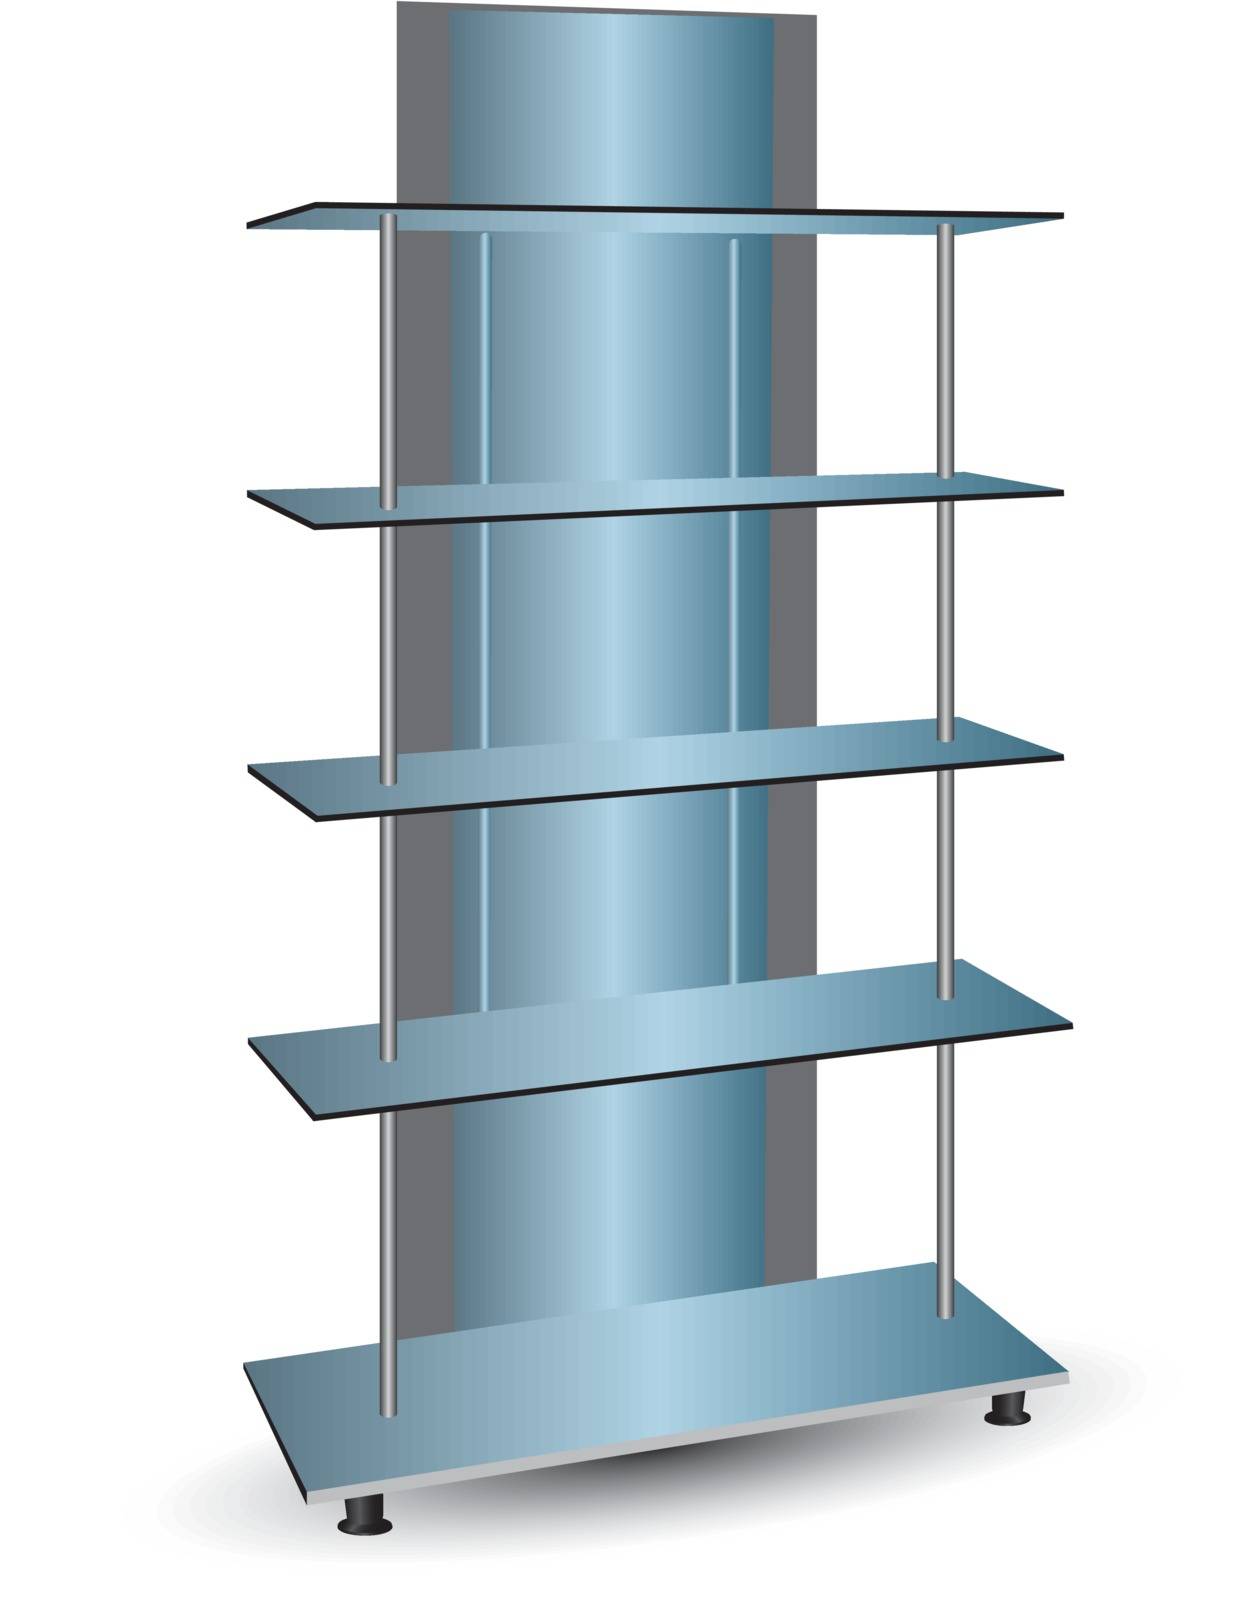 Mirror commercial shelving for cosmetics. Vector illustration.